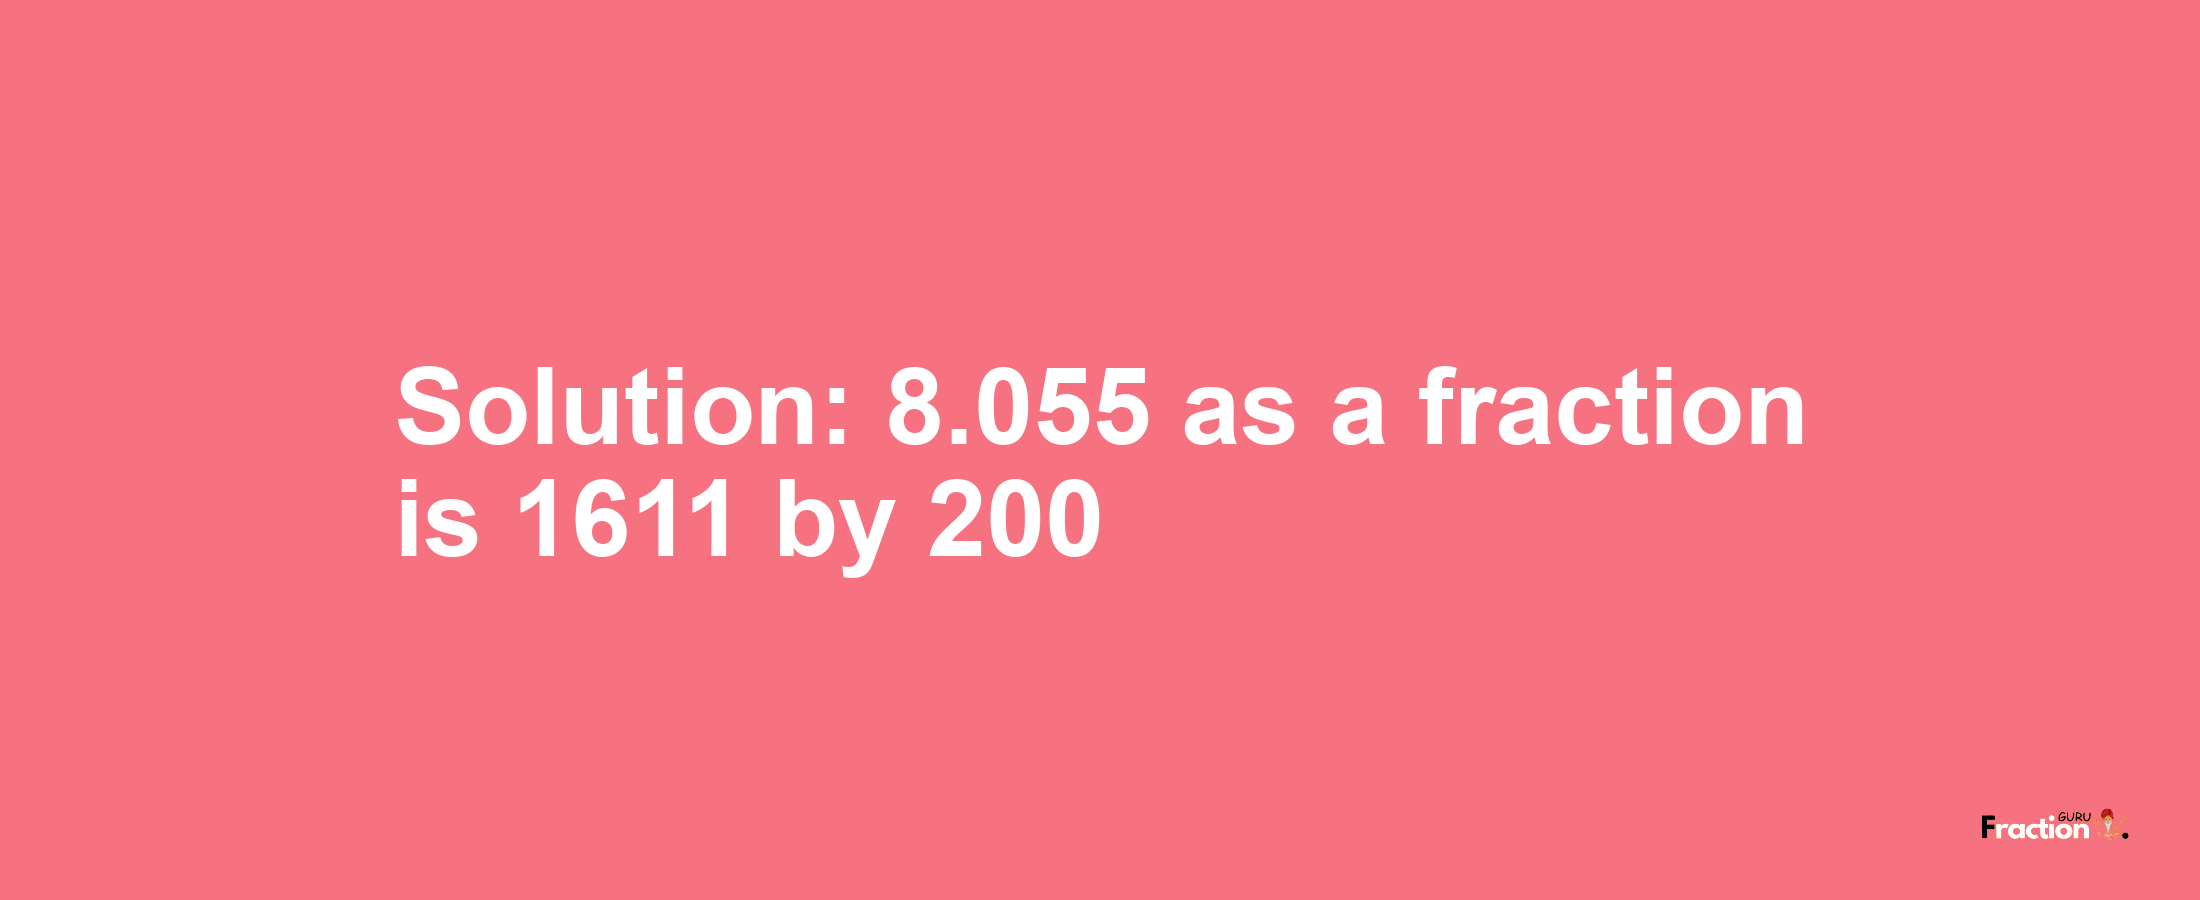 Solution:8.055 as a fraction is 1611/200